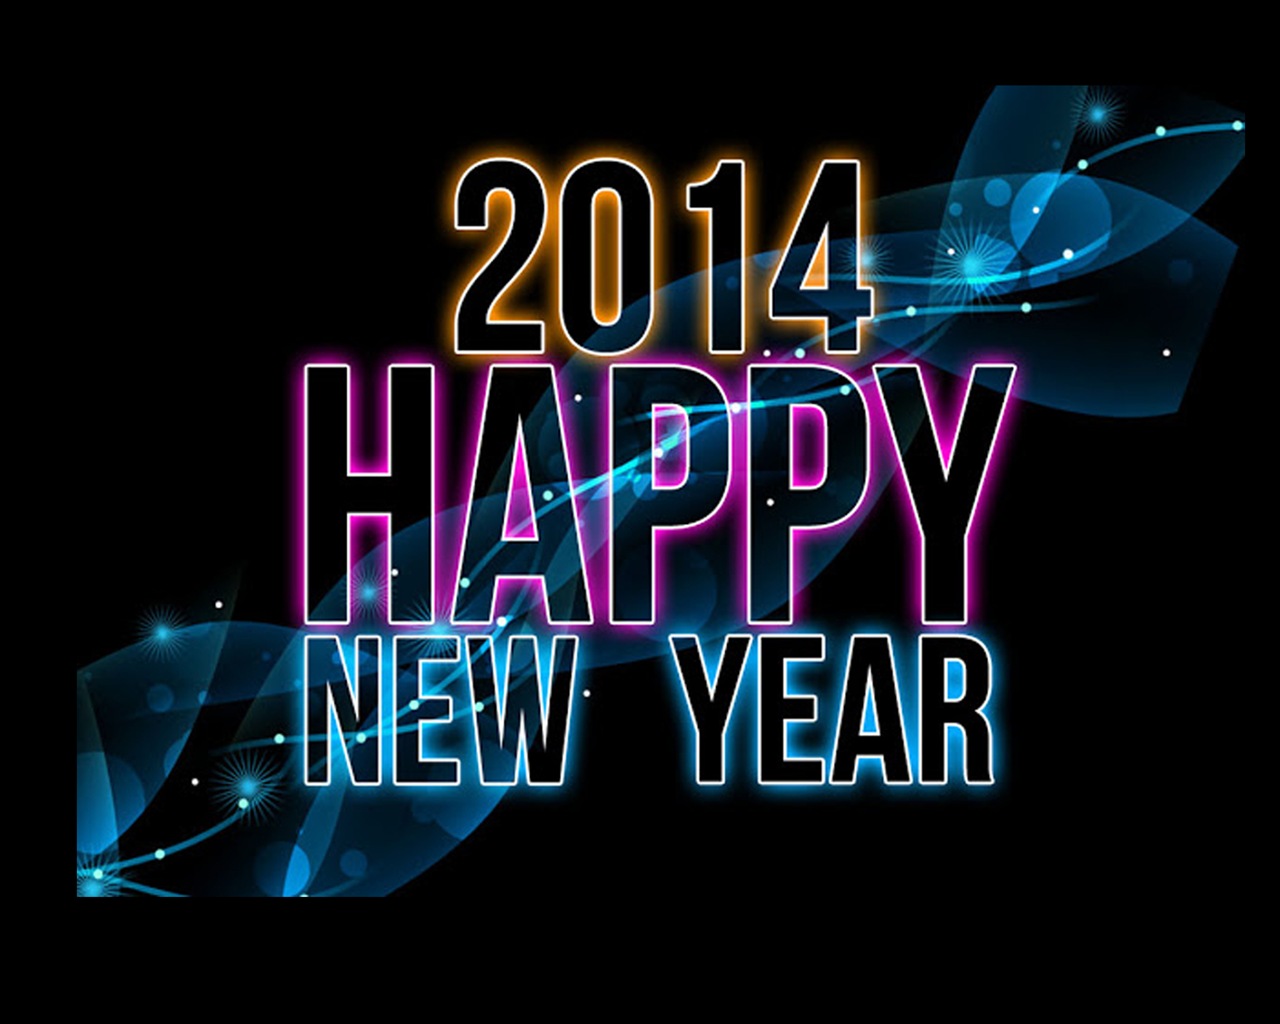 2014 New Year Theme HD Wallpapers (1) #11 - 1280x1024